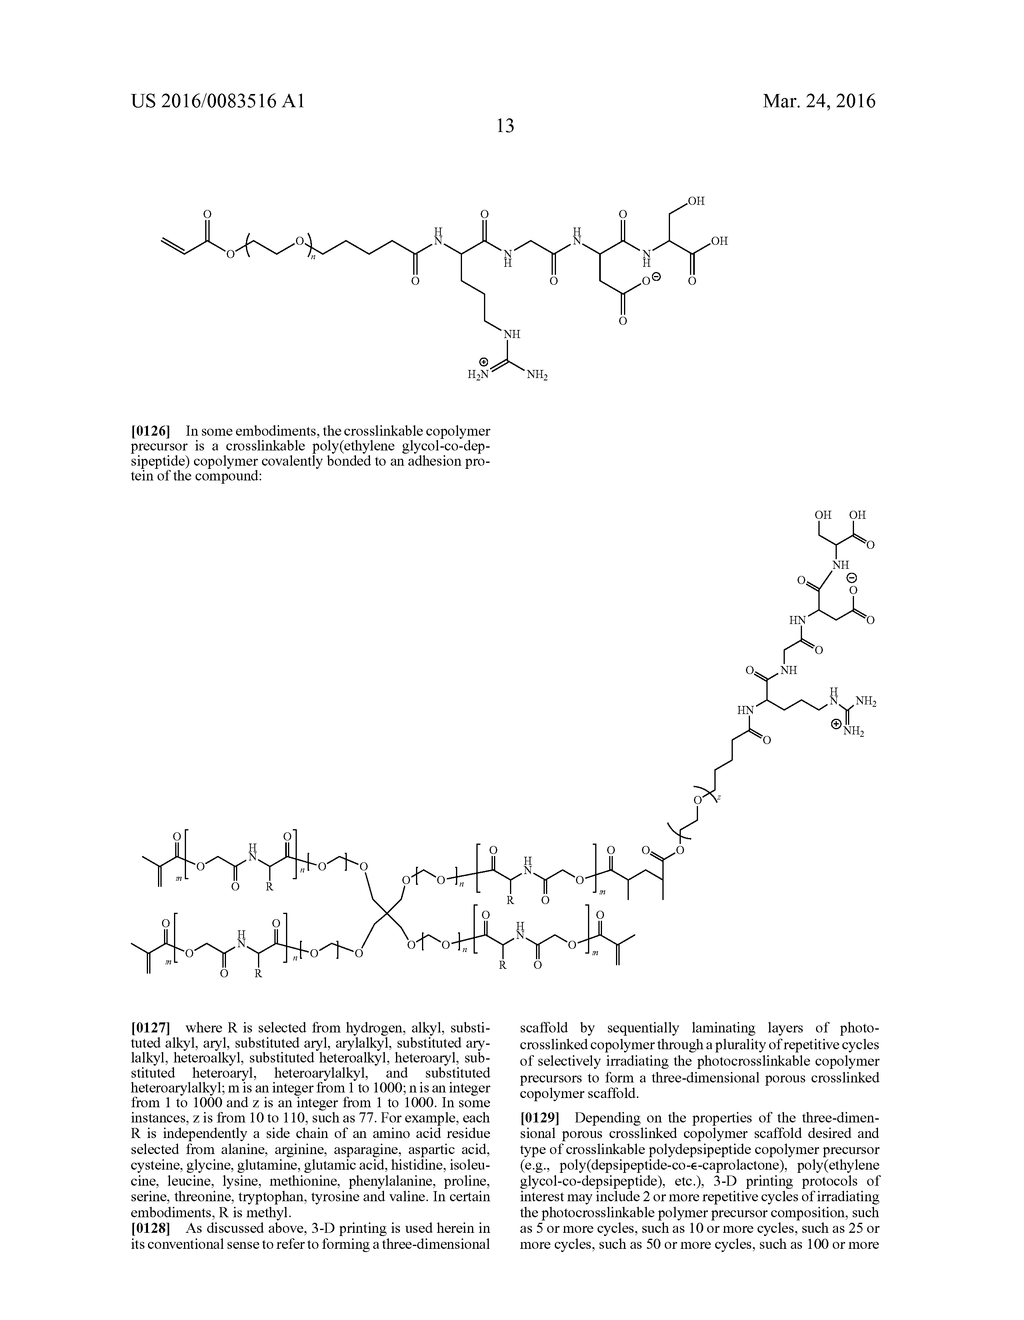 CROSSLINKED POLY-DEPSIPEPTIDE COPOLYMERS AND METHODS OF MAKING THEREOF - diagram, schematic, and image 38